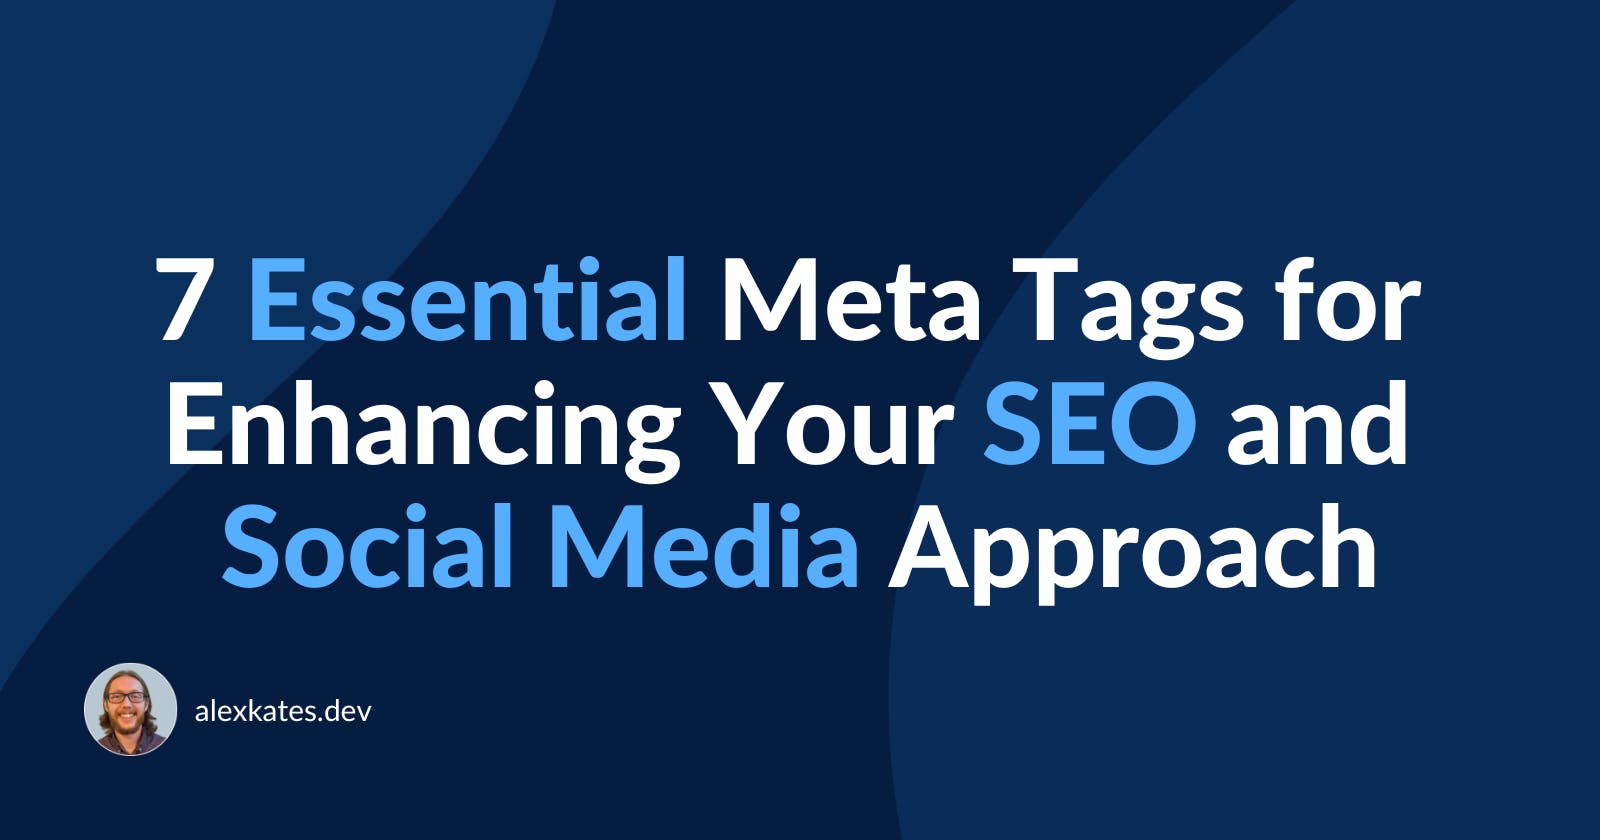 7 Essential Meta Tags for Enhancing Your SEO and Social Media Approach